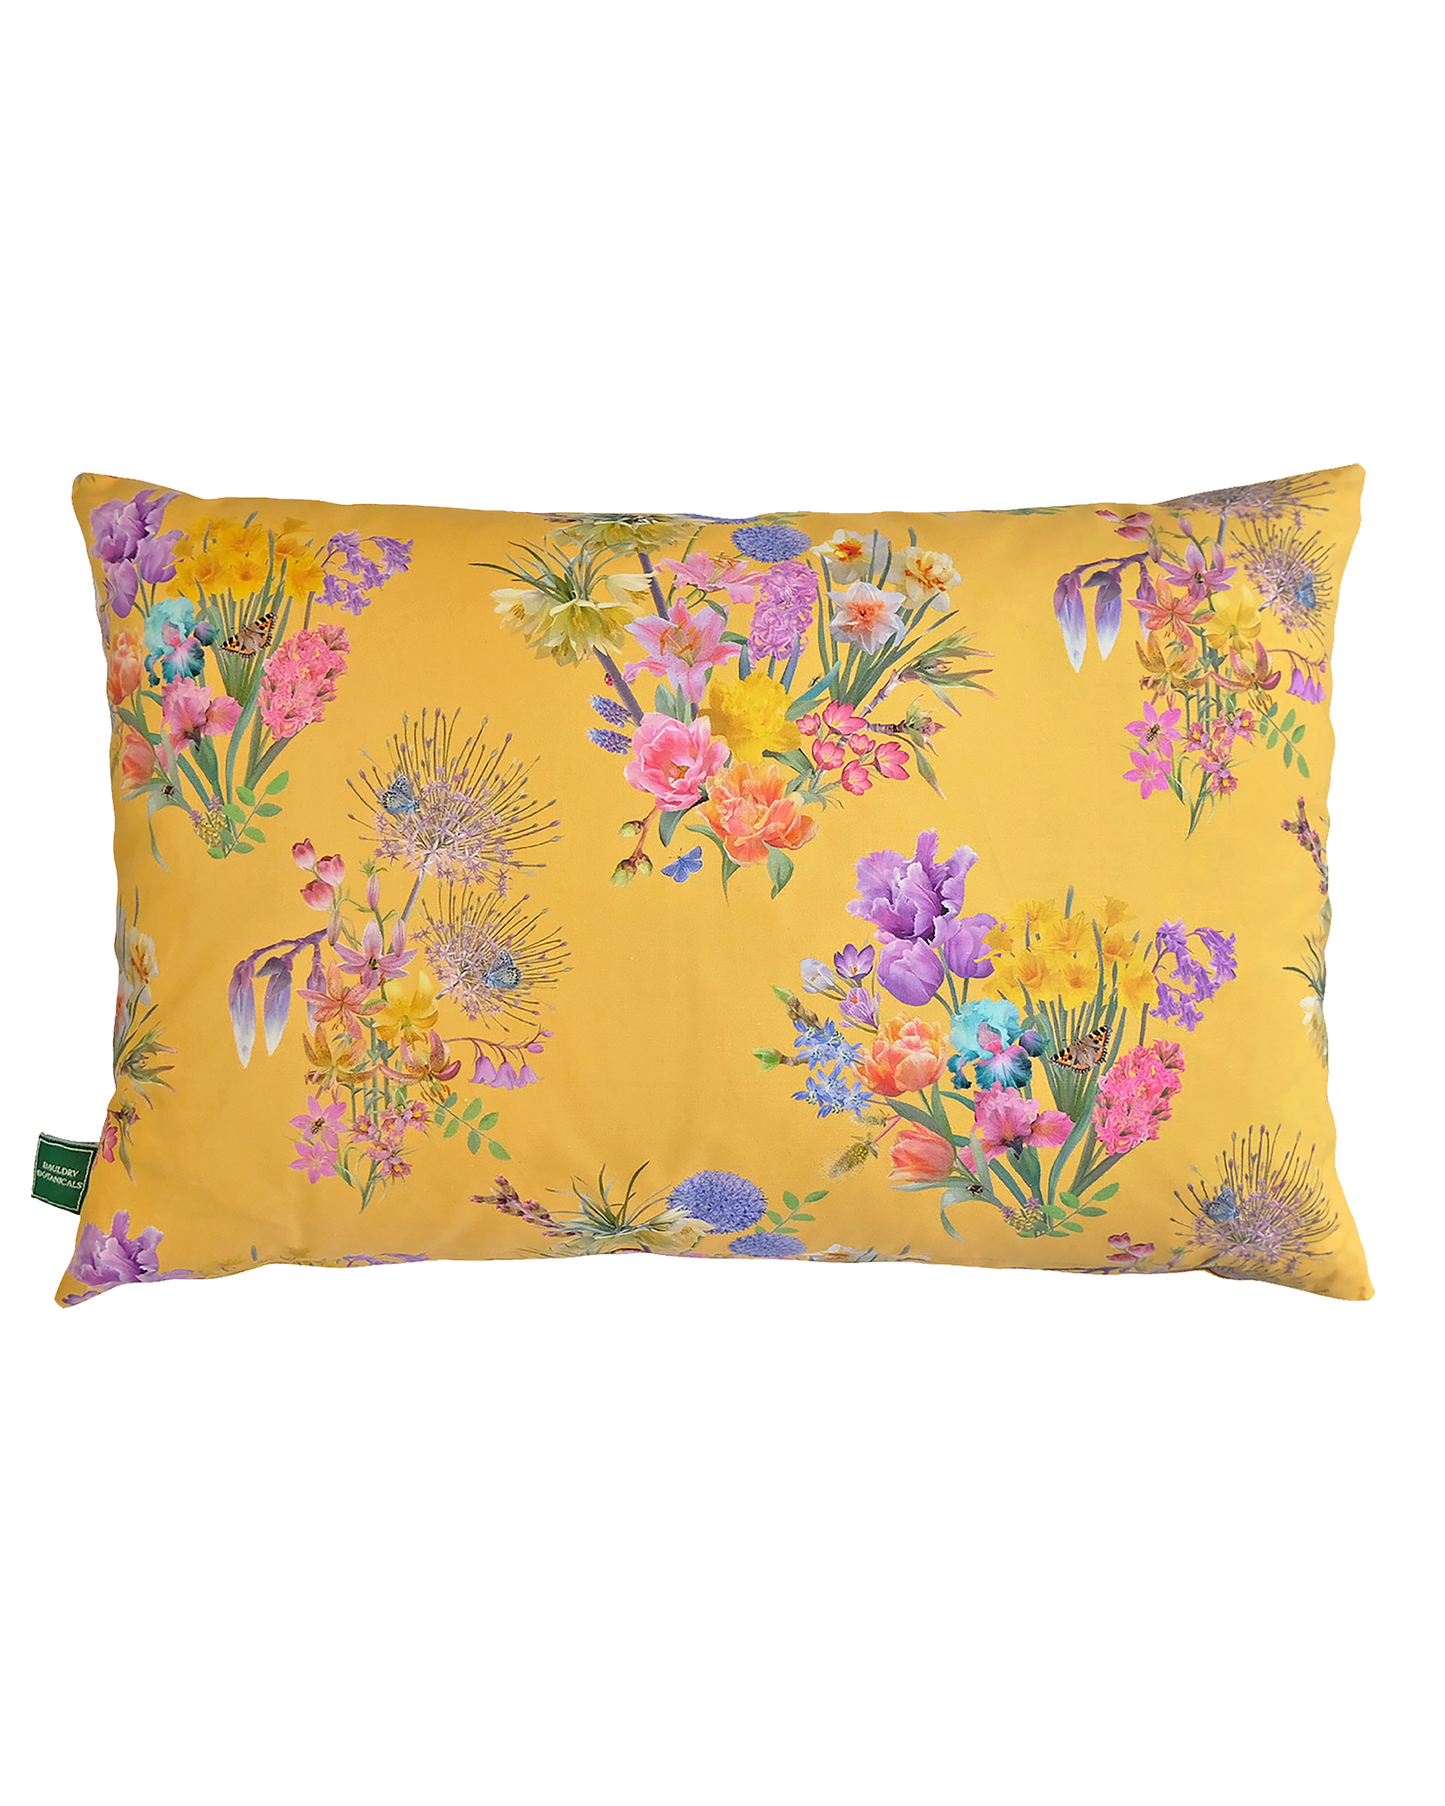 Bright yellow hemp cushion for earth friendly happy home decor ideas with a bold flowering pattern